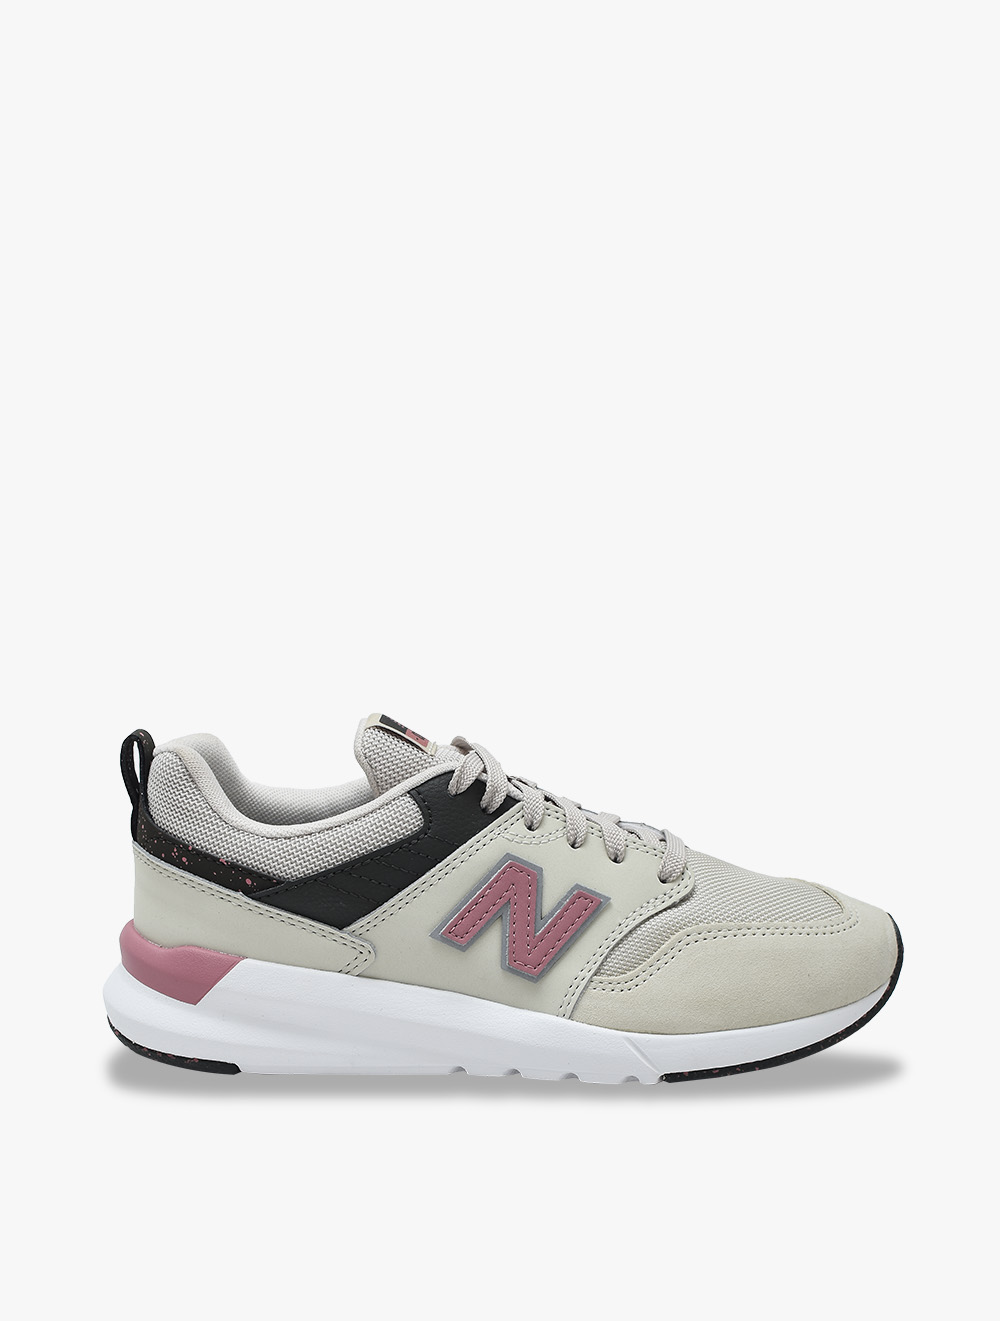 nb shoes indonesia